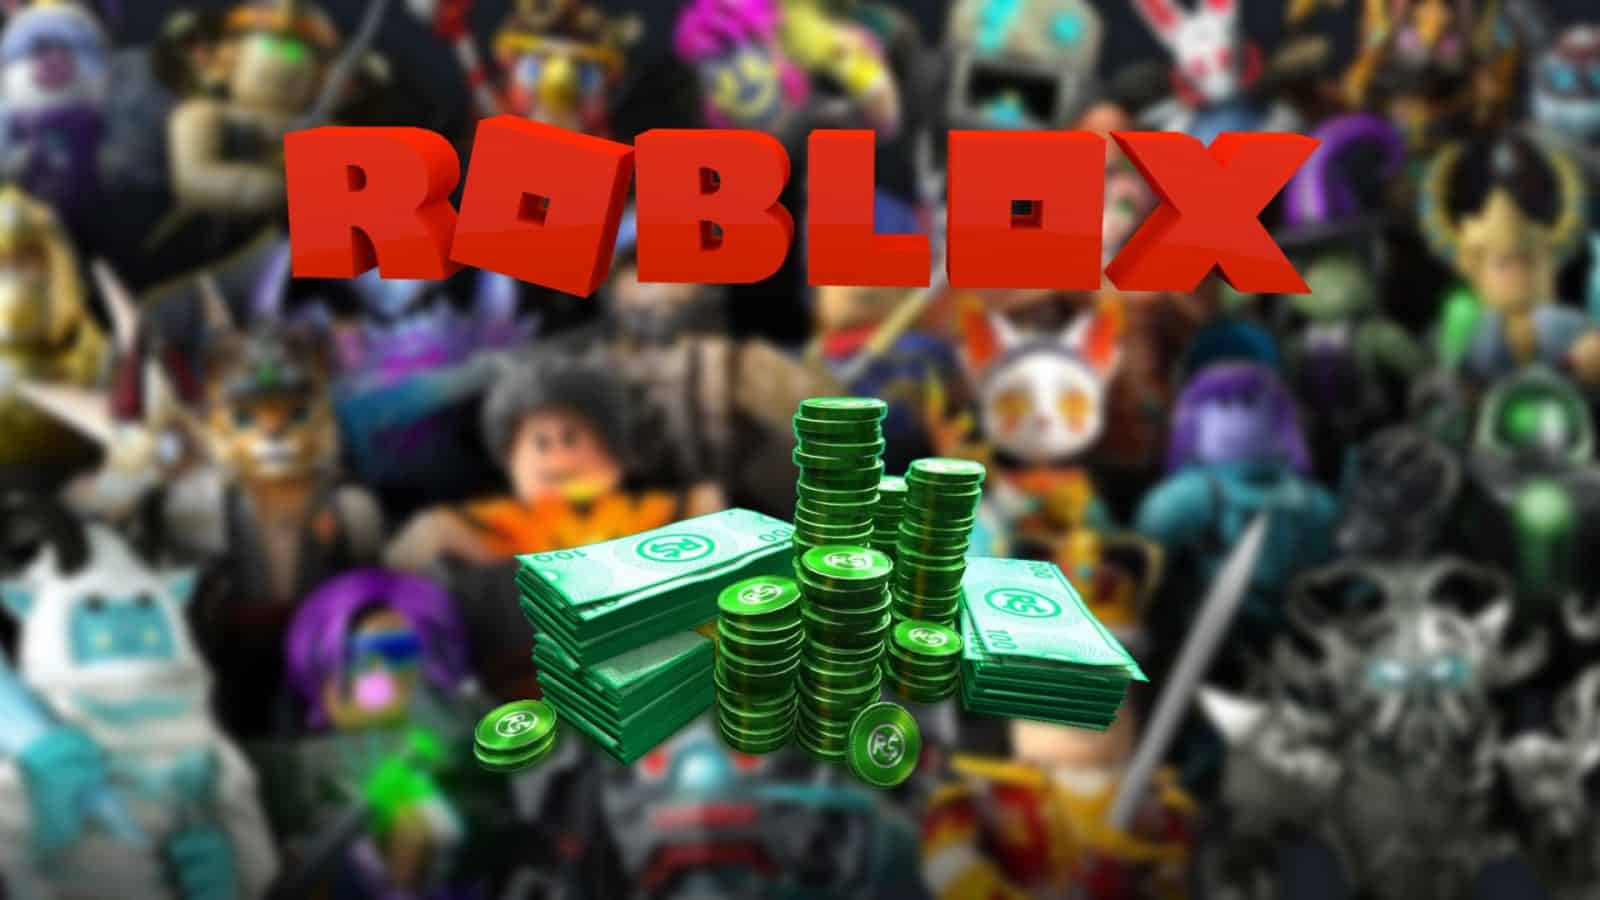 Hacker posts internal Roblox documents in extortion attempt